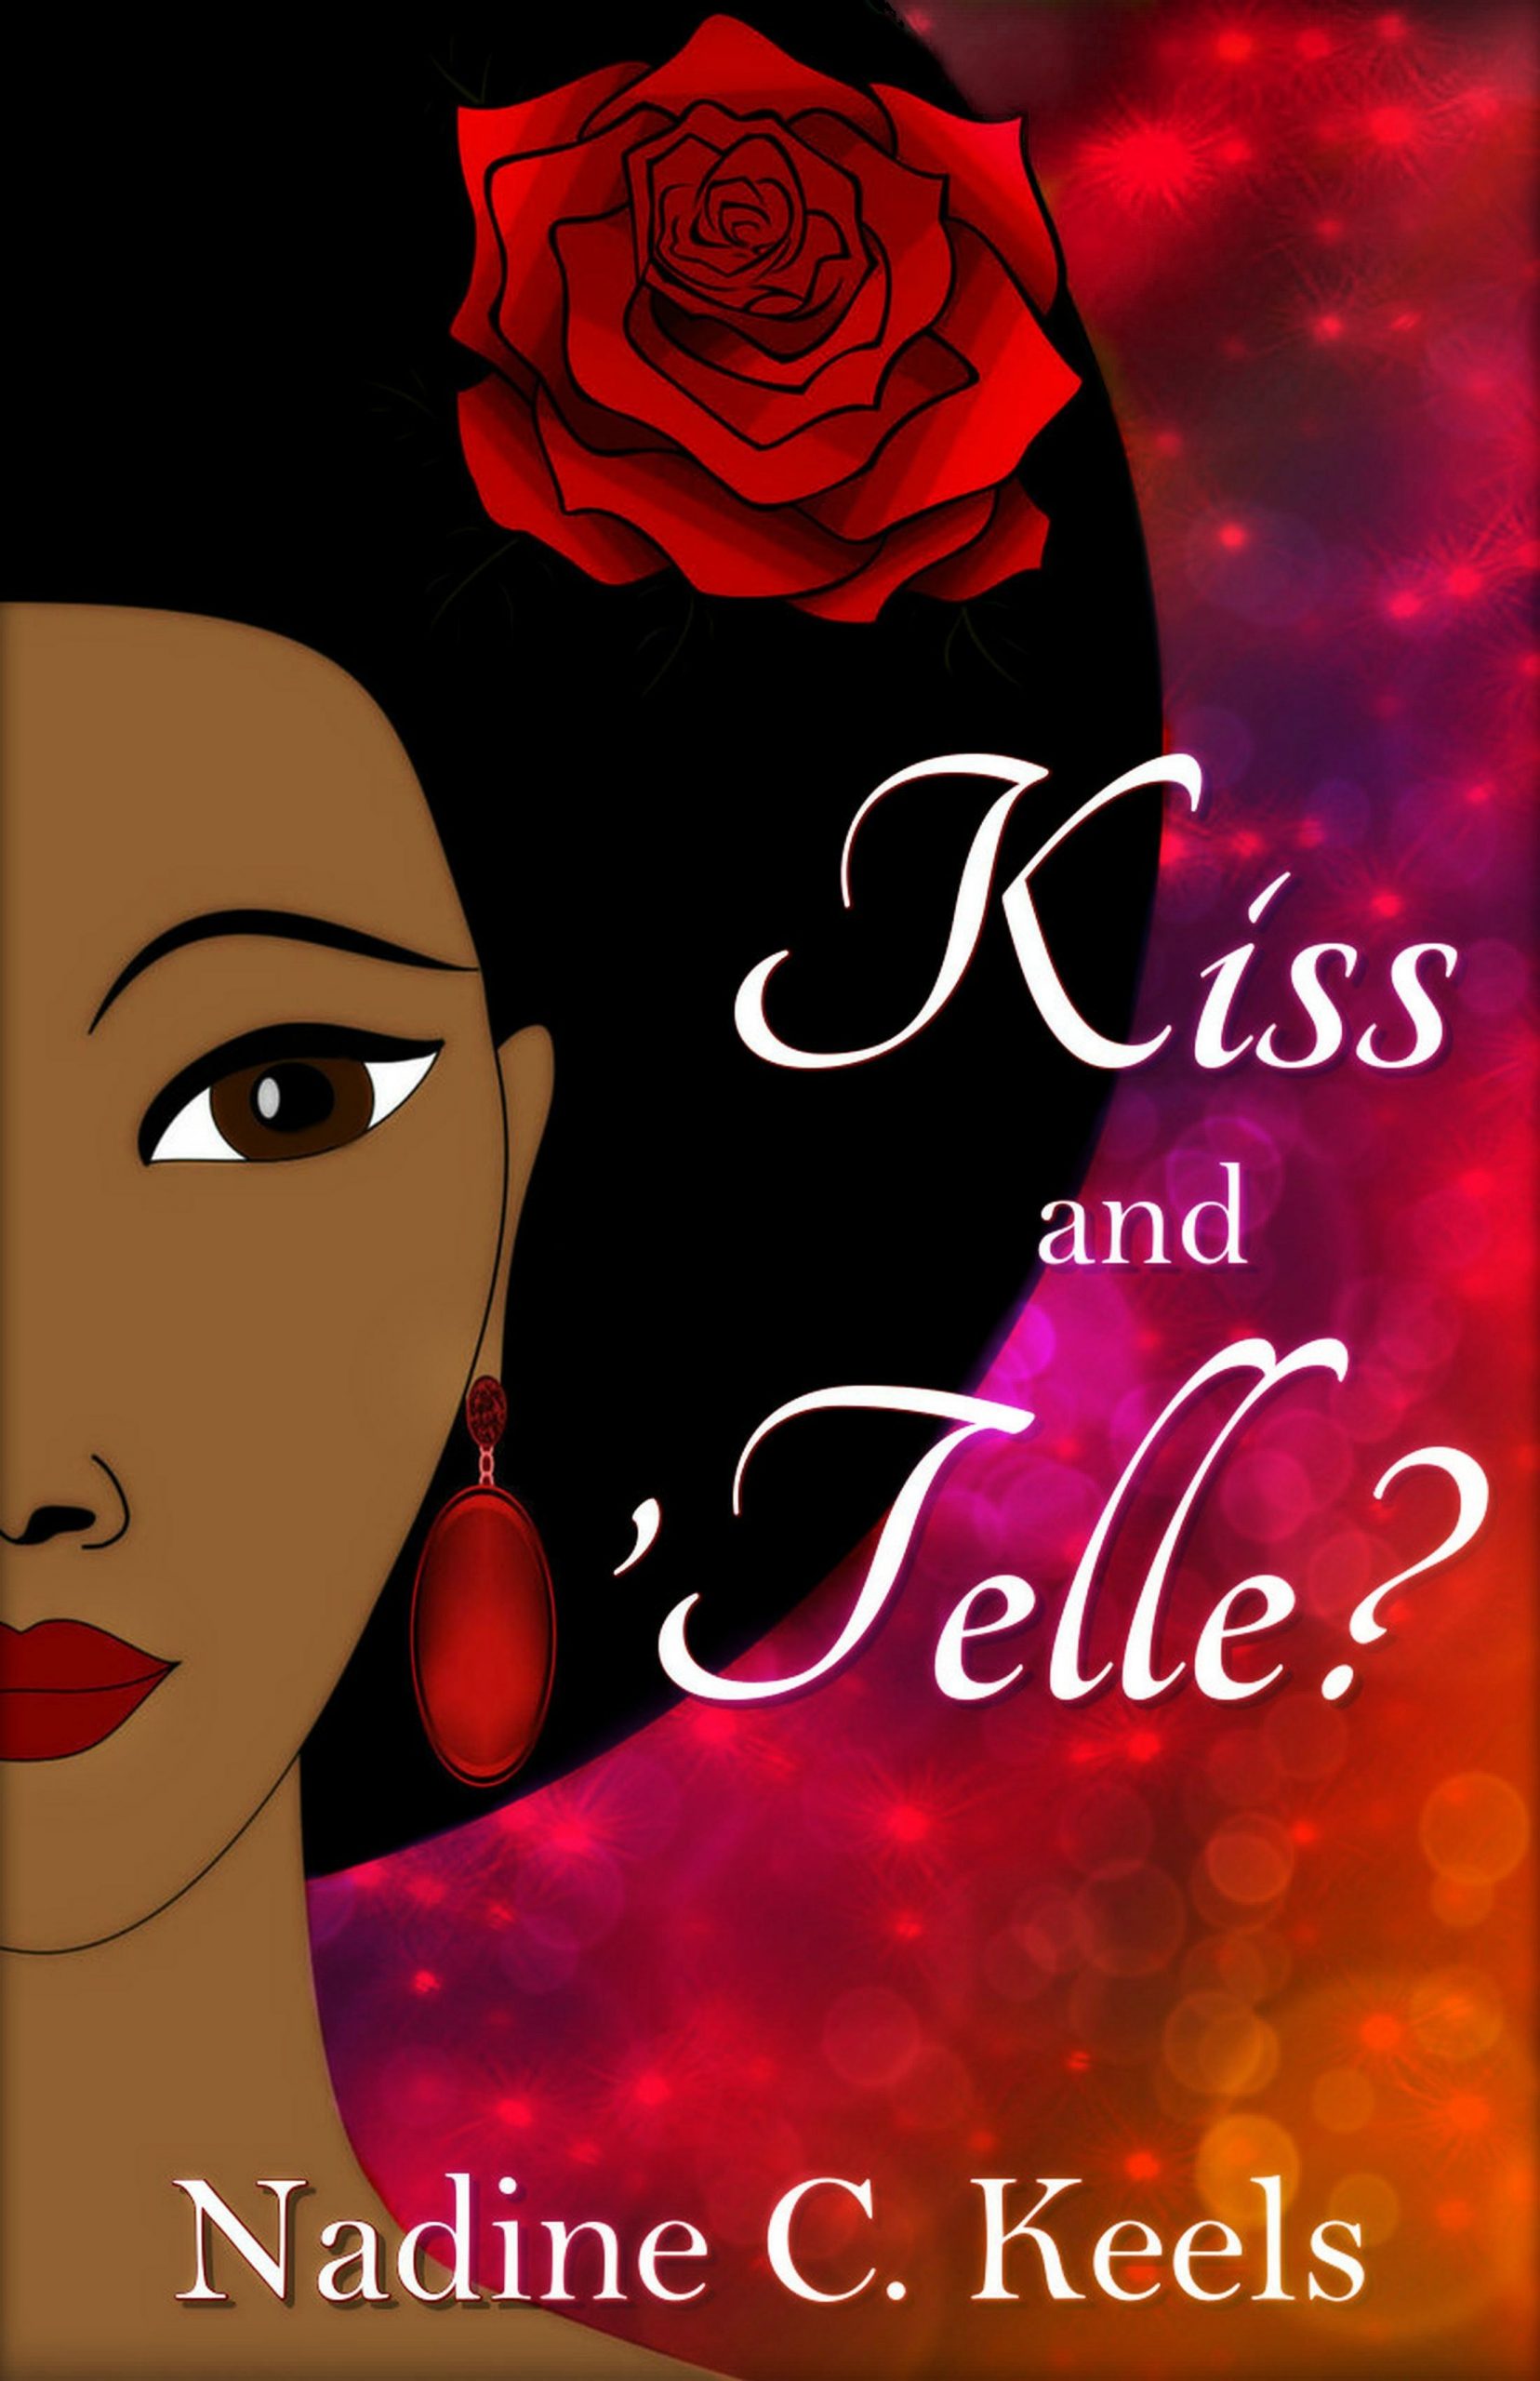 Kiss and 'Telle by Nadine Keets